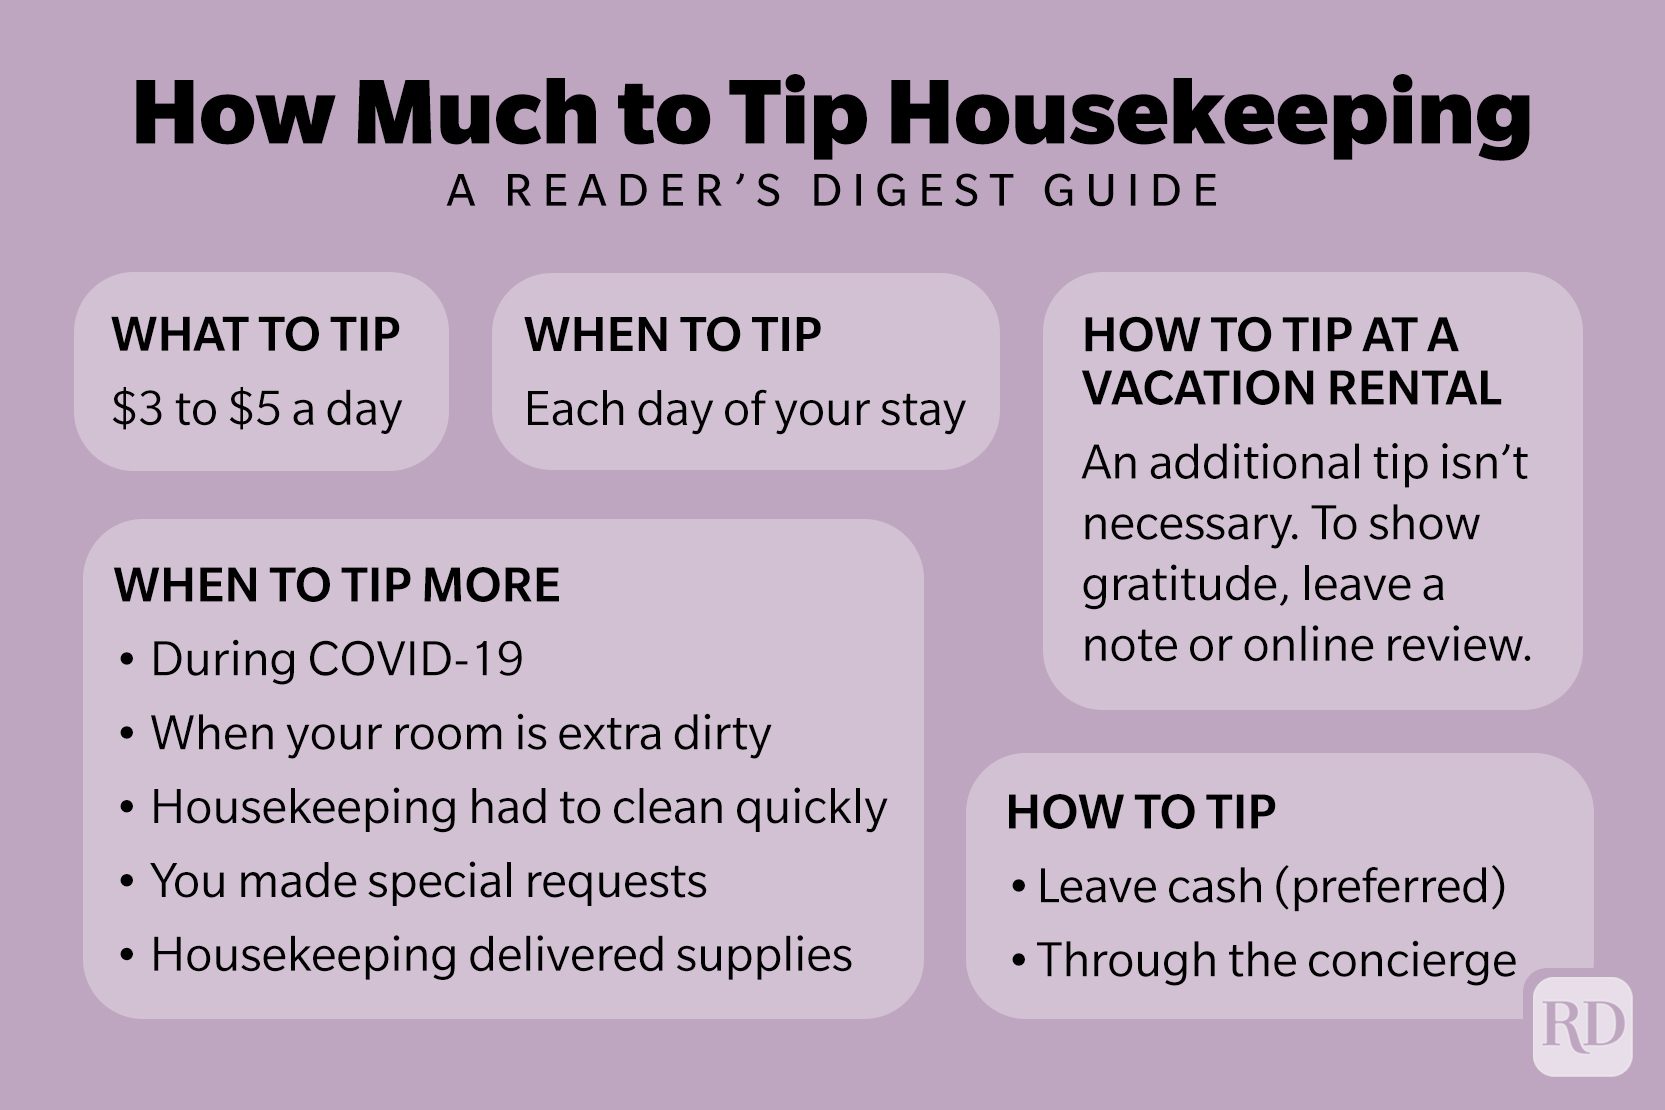 How Much To Tip Housekeeping Infographic